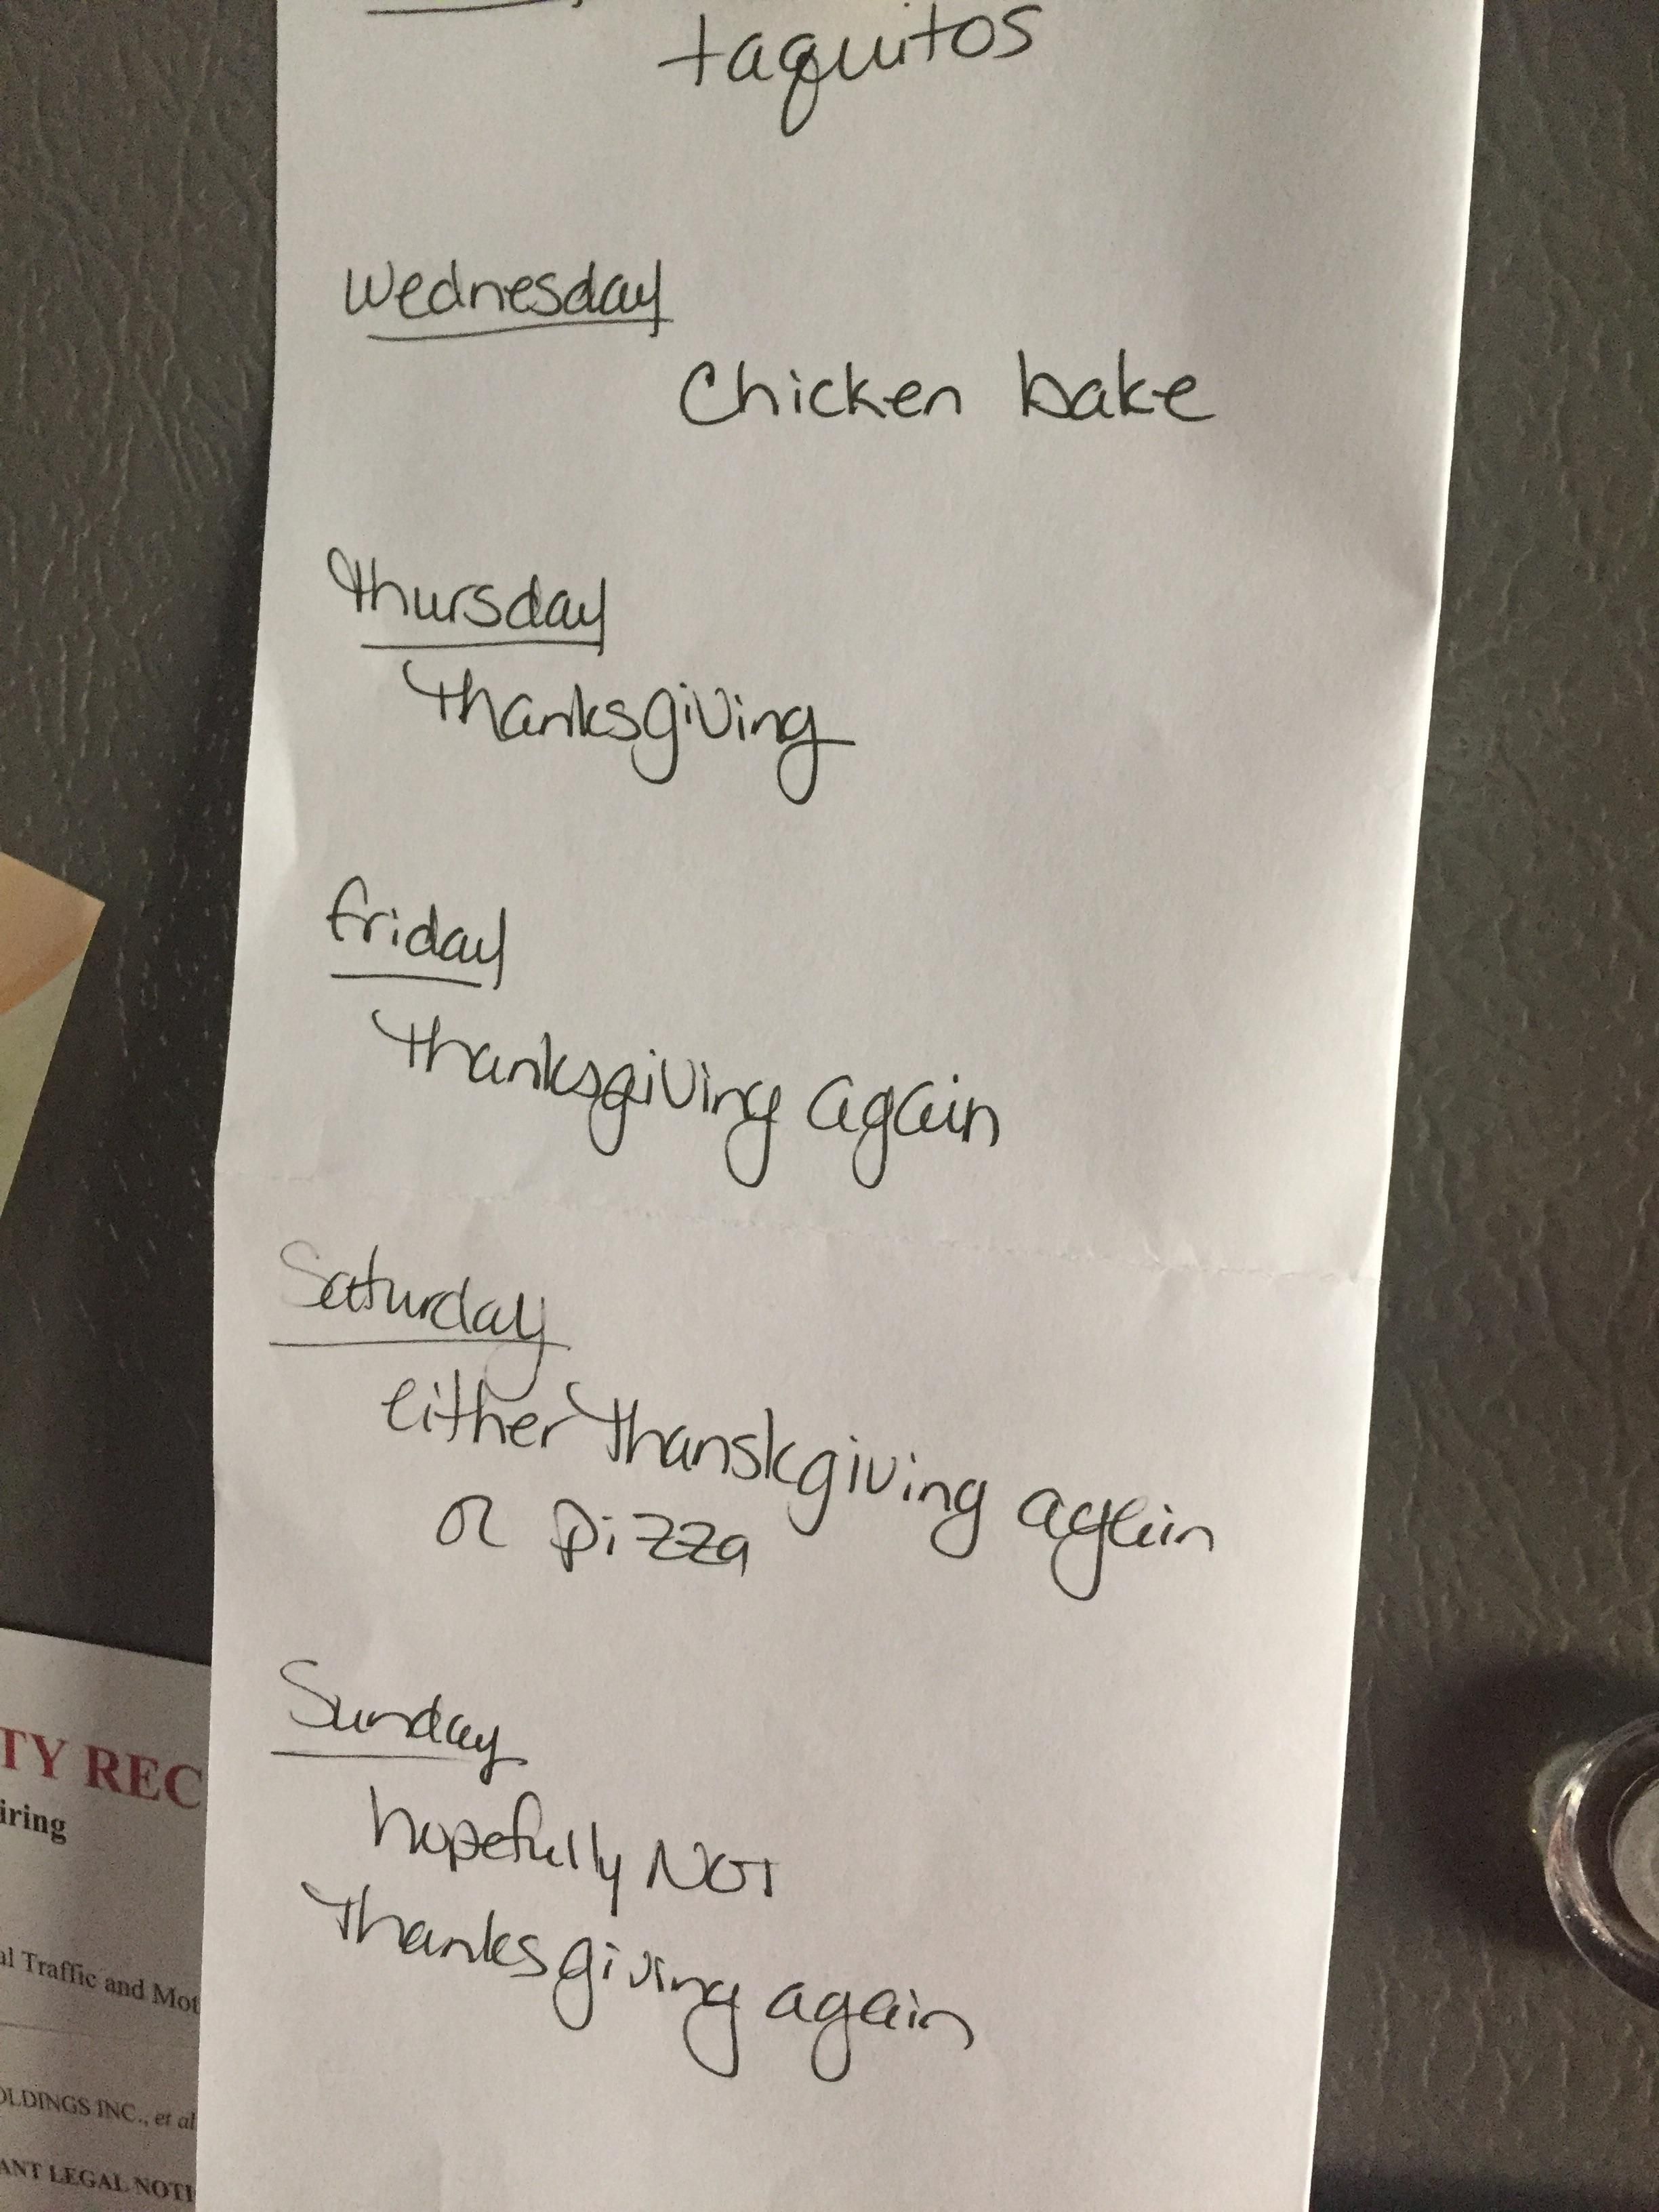 My family’s meal plan for the week